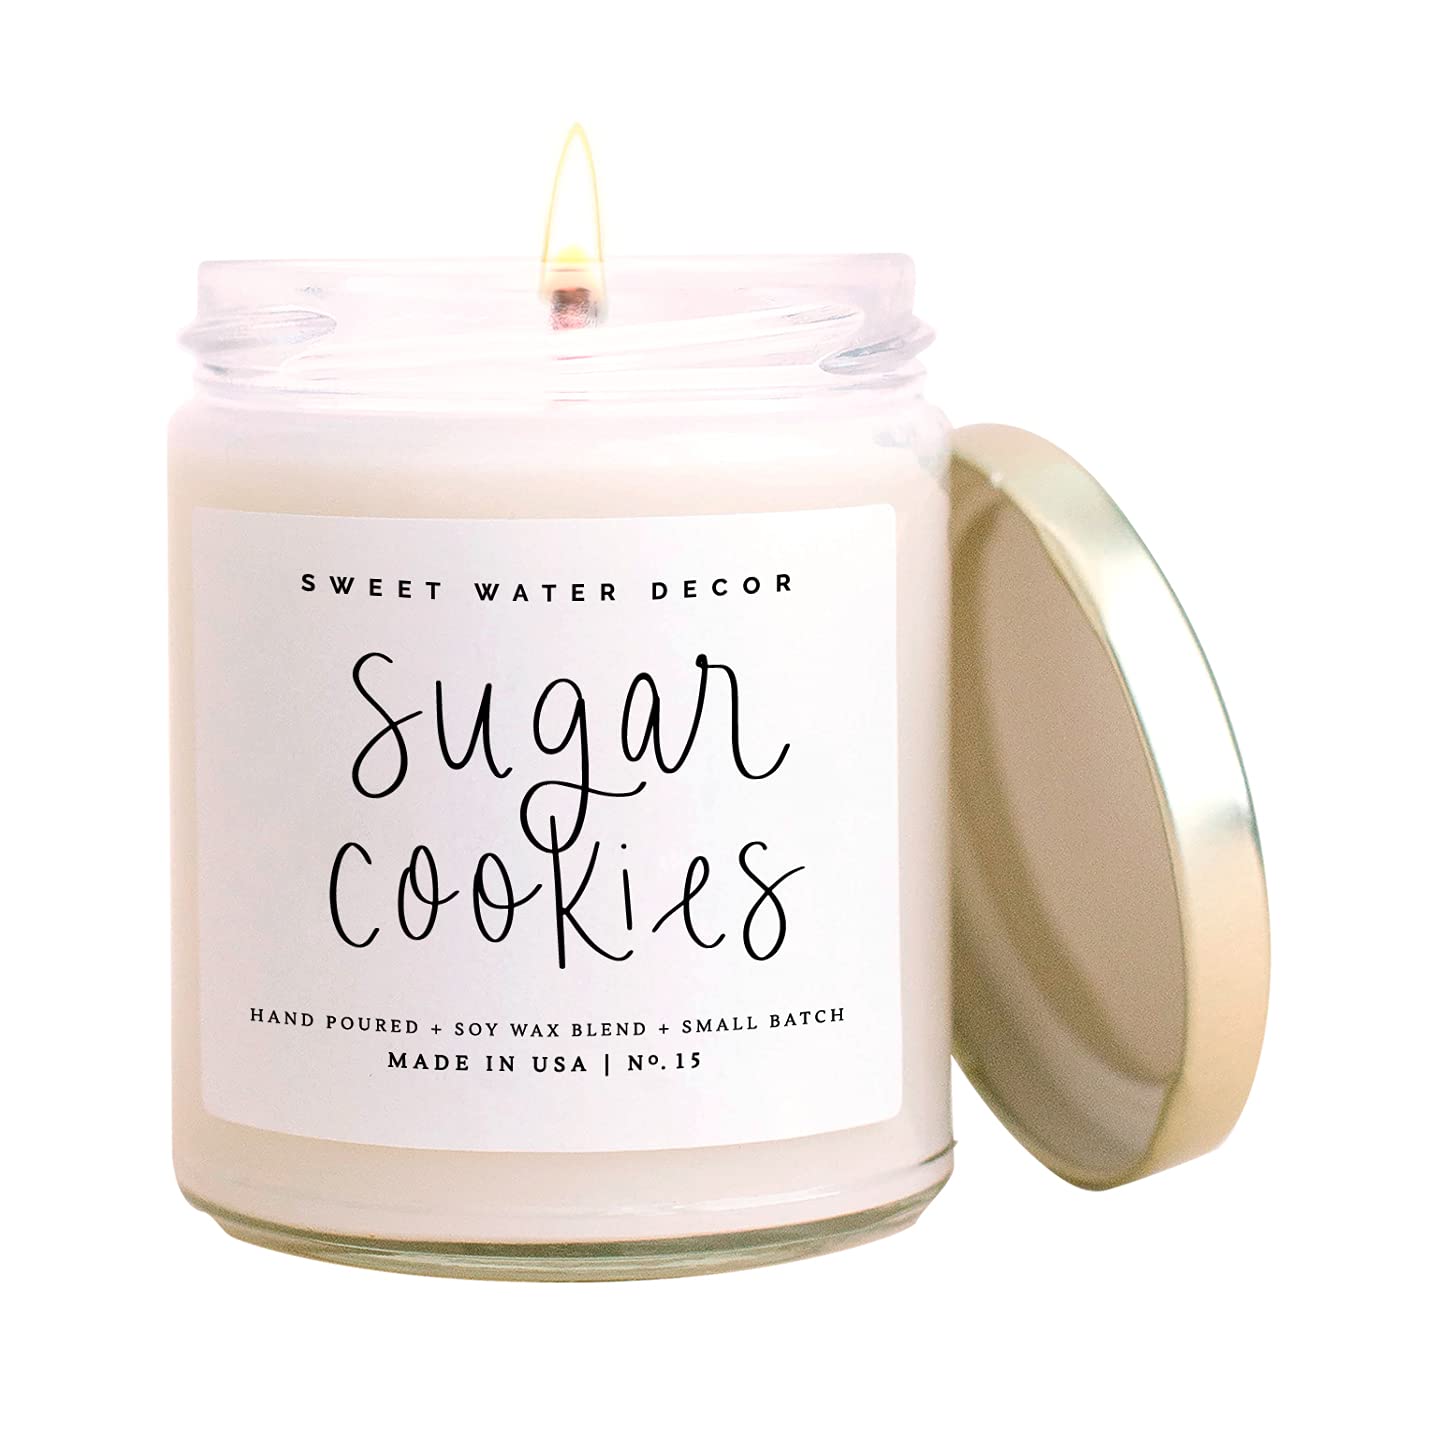 Holiday Scented Candles - Sugar Cookies by Sweet Water Decor | Amazon Stocking Stuffers | Stocking stuffers for adults | stocking stuffers for men | mens stocking stuffers | Stocking stuffers for her | Stocking stuffers for guys | Cheap stocking stuffers | Best stocking stuffers | Stocking stuffers for wife | stocking stuffer gifts 